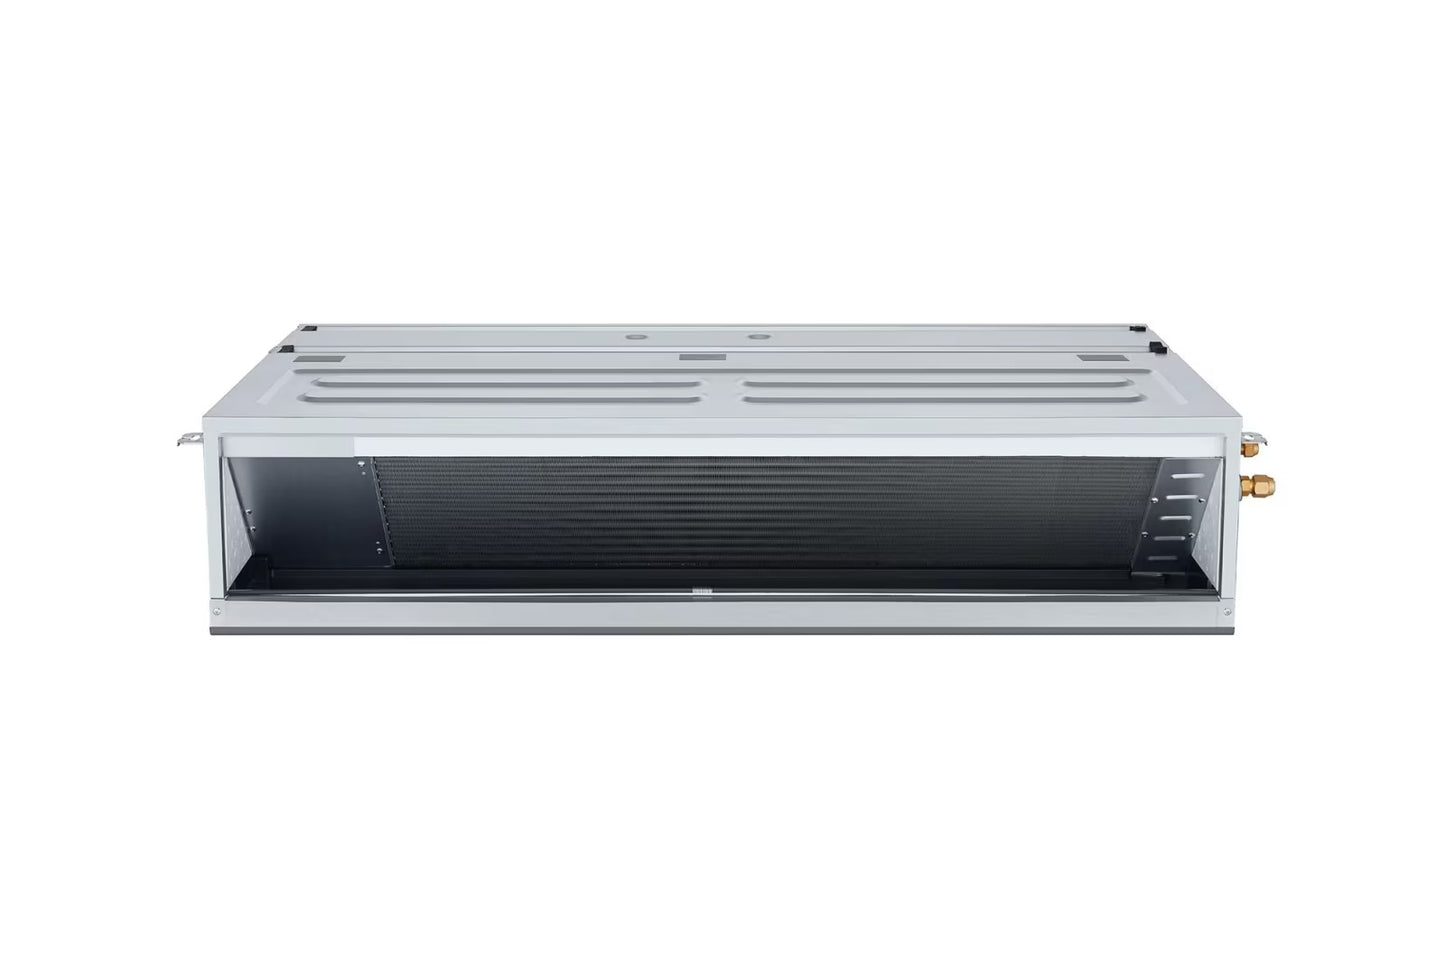 LG Ceiling Concealed Duct INV Unit 22.4KW with High Static and E.S.P. Control for Multiple Rooms - ARNU76GB8A2